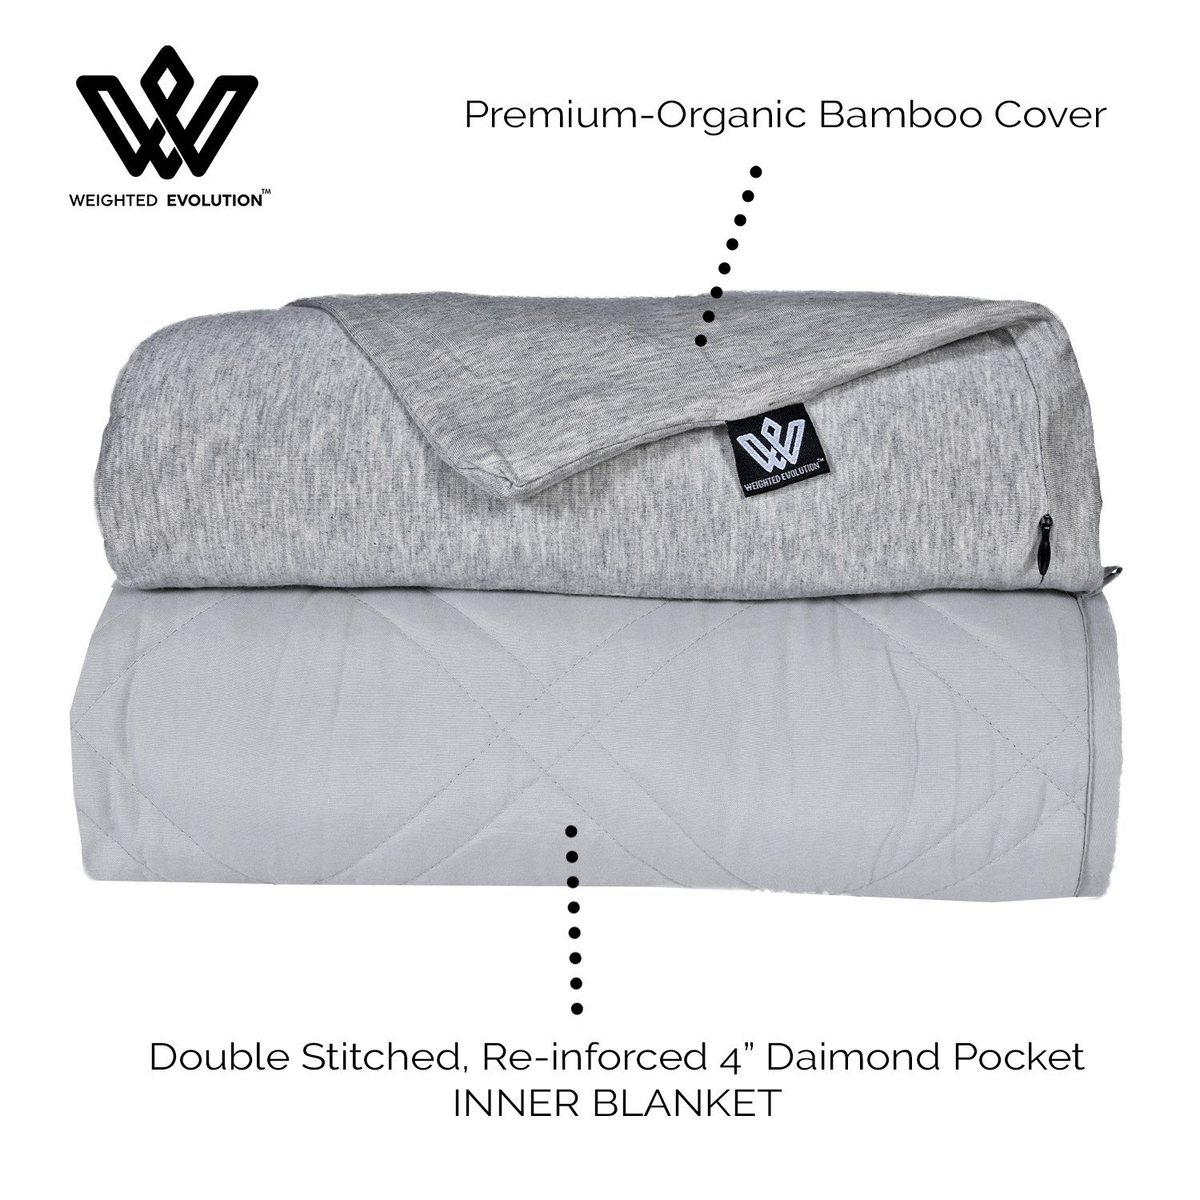 183cm x 122cm Premium Kids /& Adult Weighted Blanket /& Removable Cover Cotton//Minky Premium Glass Beads Single Bed Grey//Grey Hartann Ltd 5.5kg